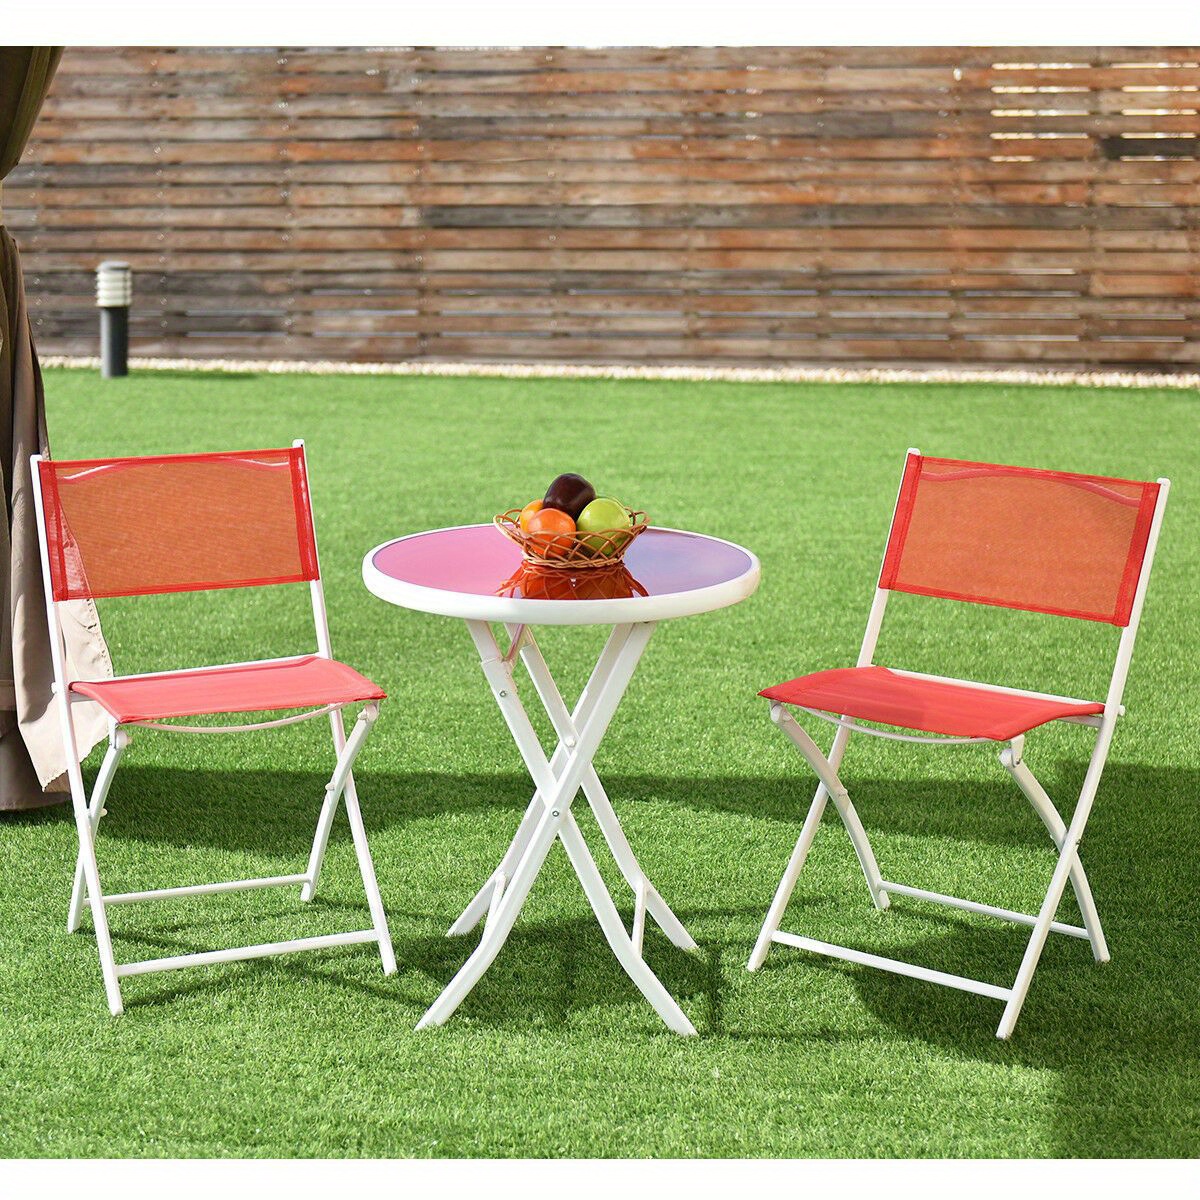 

Gymax 3 Pcs Folding Bistro Table Chairs Set Garden Backyard Patio Furniture Red New